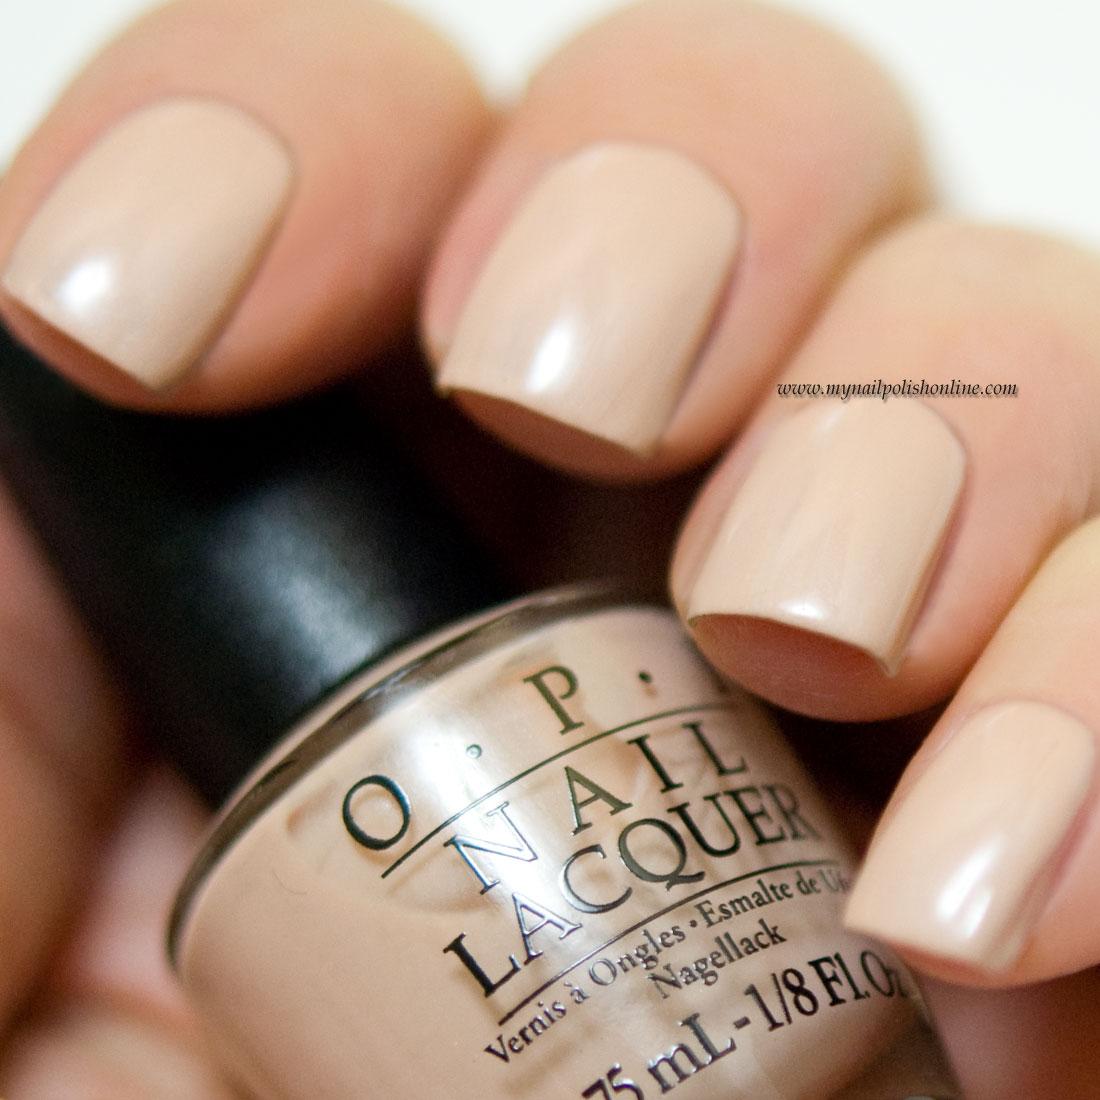 OPI - Pale to the Chief - My Nail Polish Online